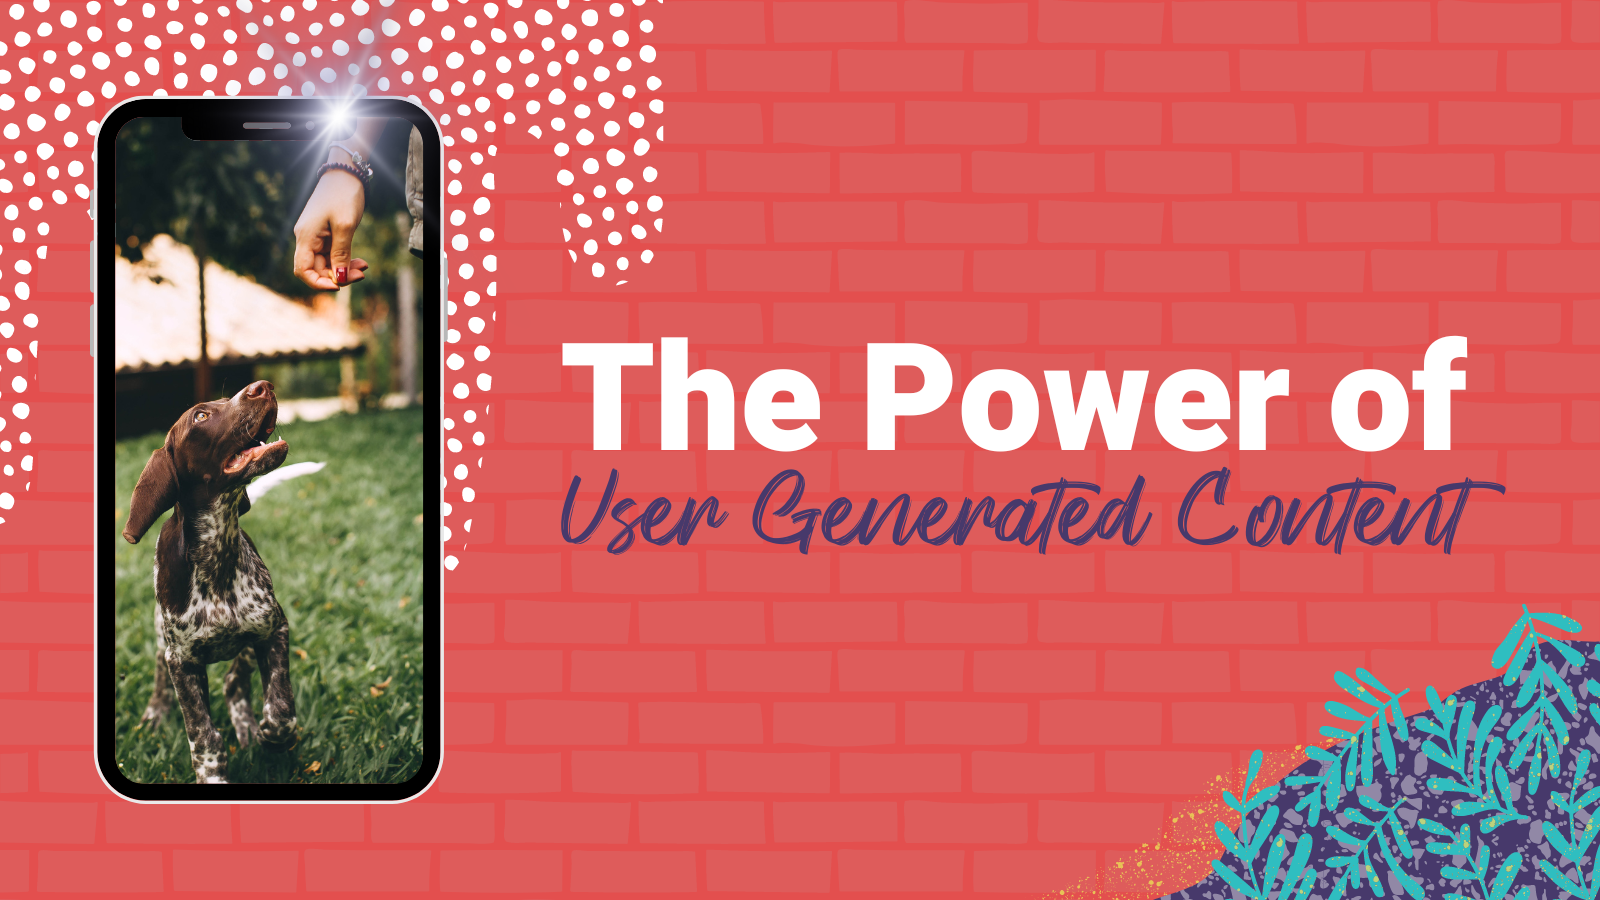 A cell phone with a picture of a dog next to the words "The Power of User Generated Content"